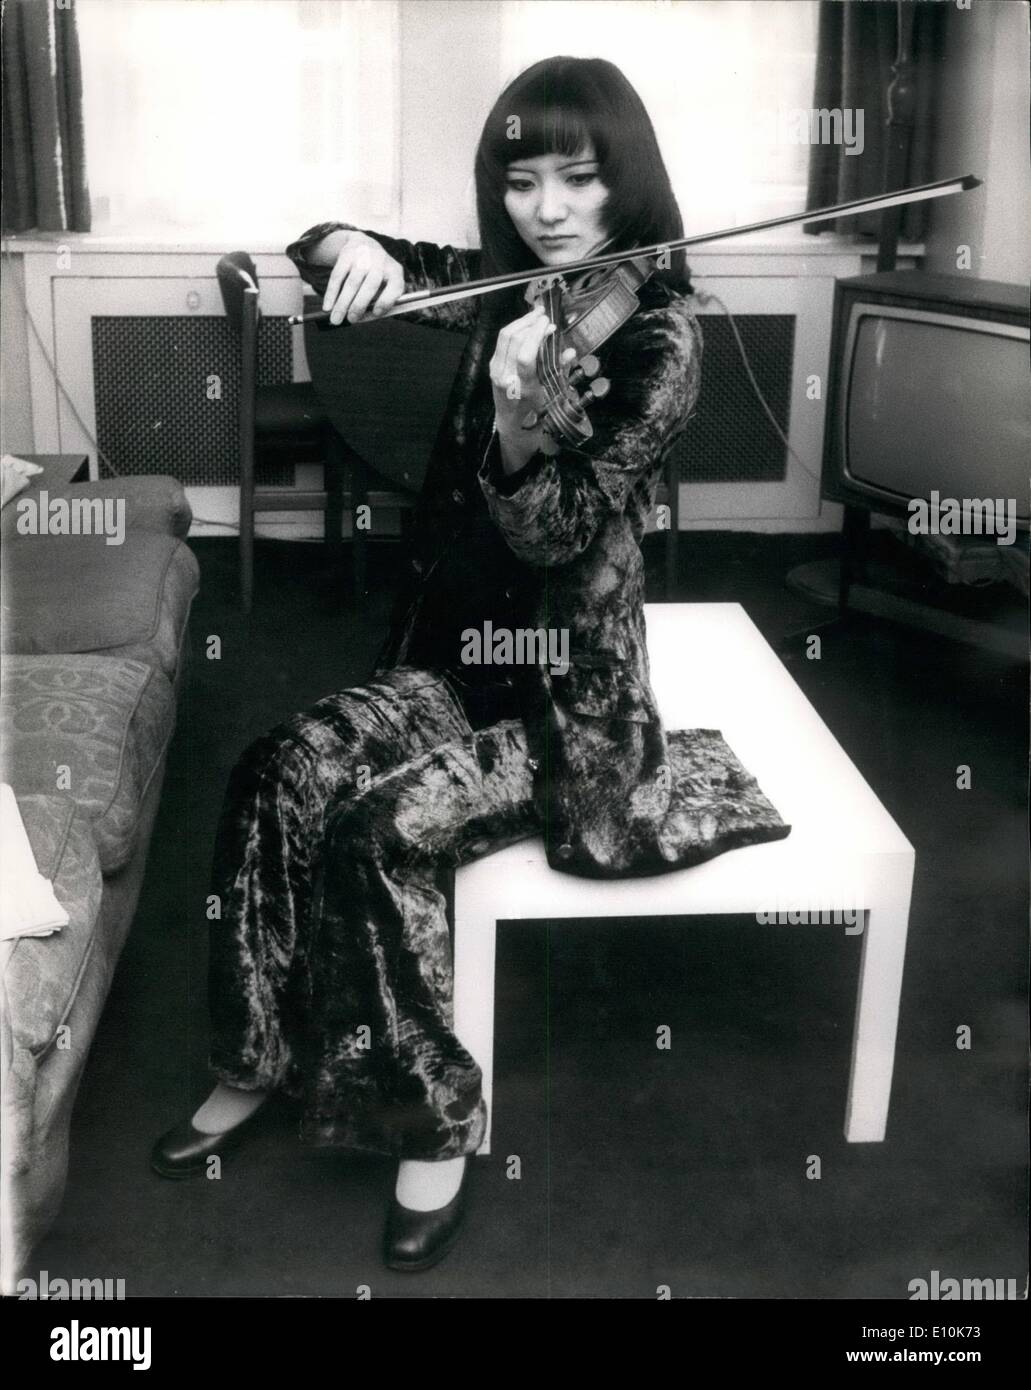 May 05, 1973 - Japanese Violinist In London For Concerts: There was a photo call today for Tokyo-born Teiko Maehshi, who is here to make her London debut in two concerts with the Royal Philharmonic Orchestra, conducted by Rudolf Kempe, The first will be at Fairfield Hall, Croydon, on May 19th, and the second at the Festival Hal on May 20. Her London debut will followed by concerts in Italy and Germany. Photo Shows: Teiko Maehashi seen practising on her violin, during today's photocall in London. Stock Photo